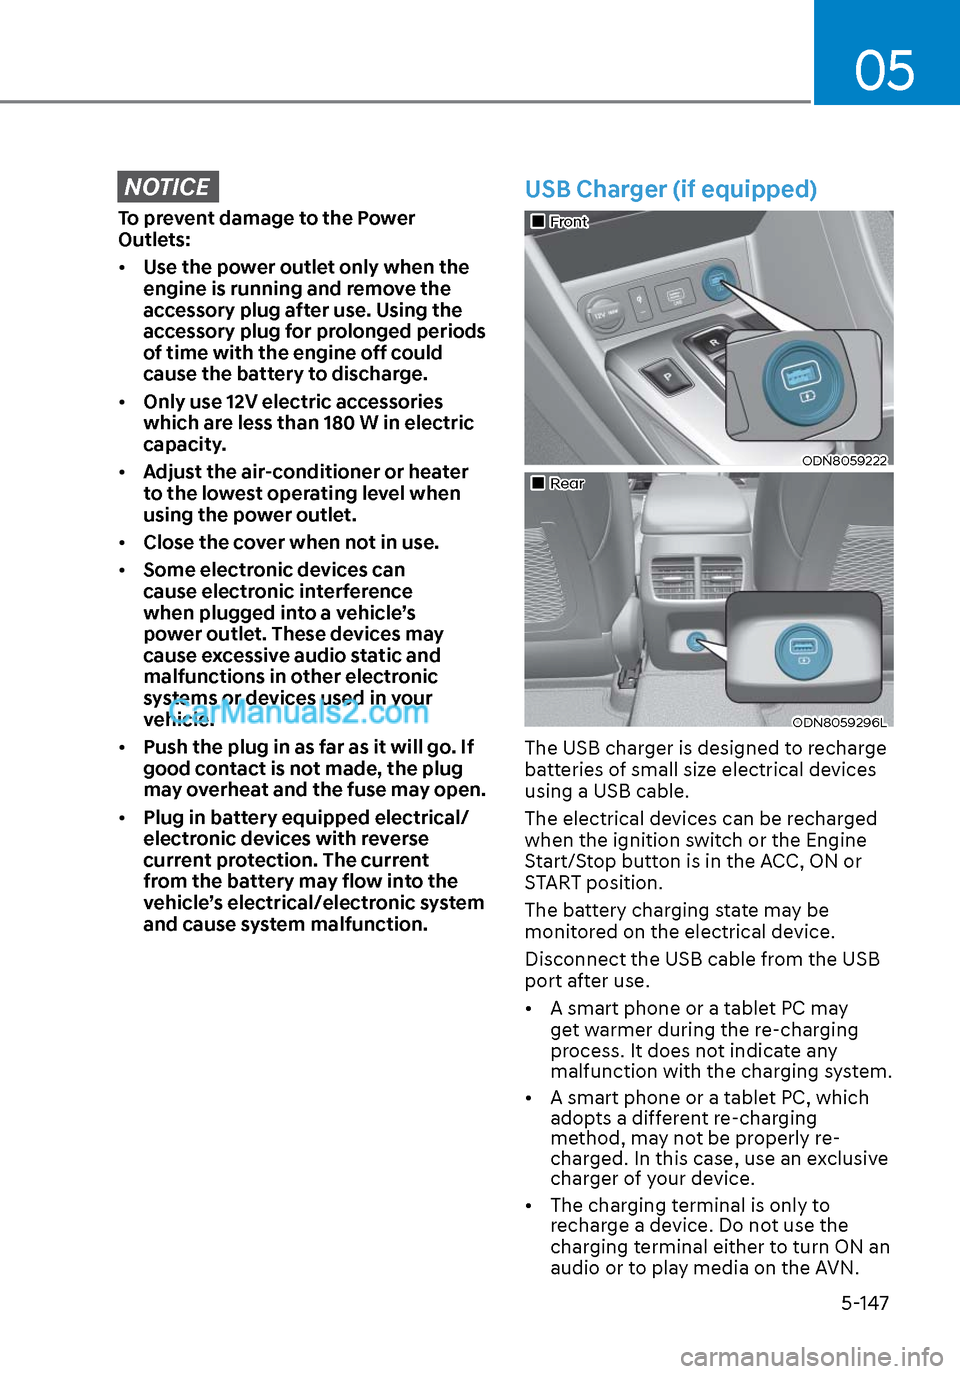 Hyundai Sonata 2020  Owners Manual 05
5-147
NOTICE
To prevent damage to the Power 
Outlets:
• Use the power outlet only when the 
engine is running and remove the 
accessory plug after use. Using the 
accessory plug for prolonged per